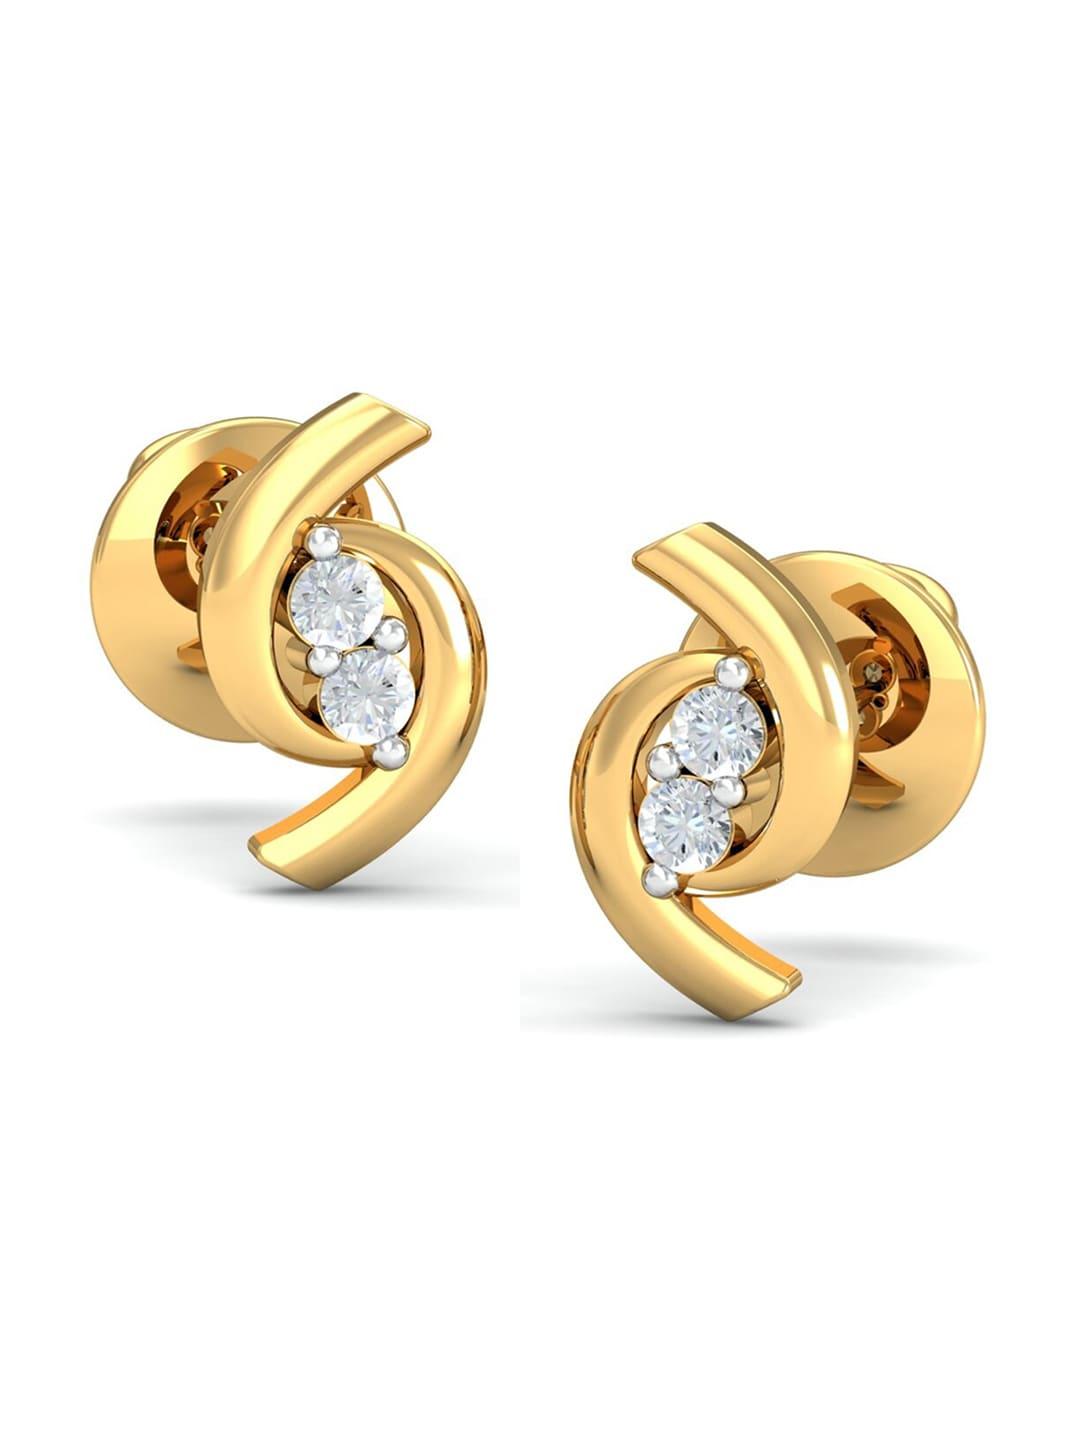 KUBERBOX Clasping Palms 18KT Gold Diamond-Studded Earrings - 1.44gm